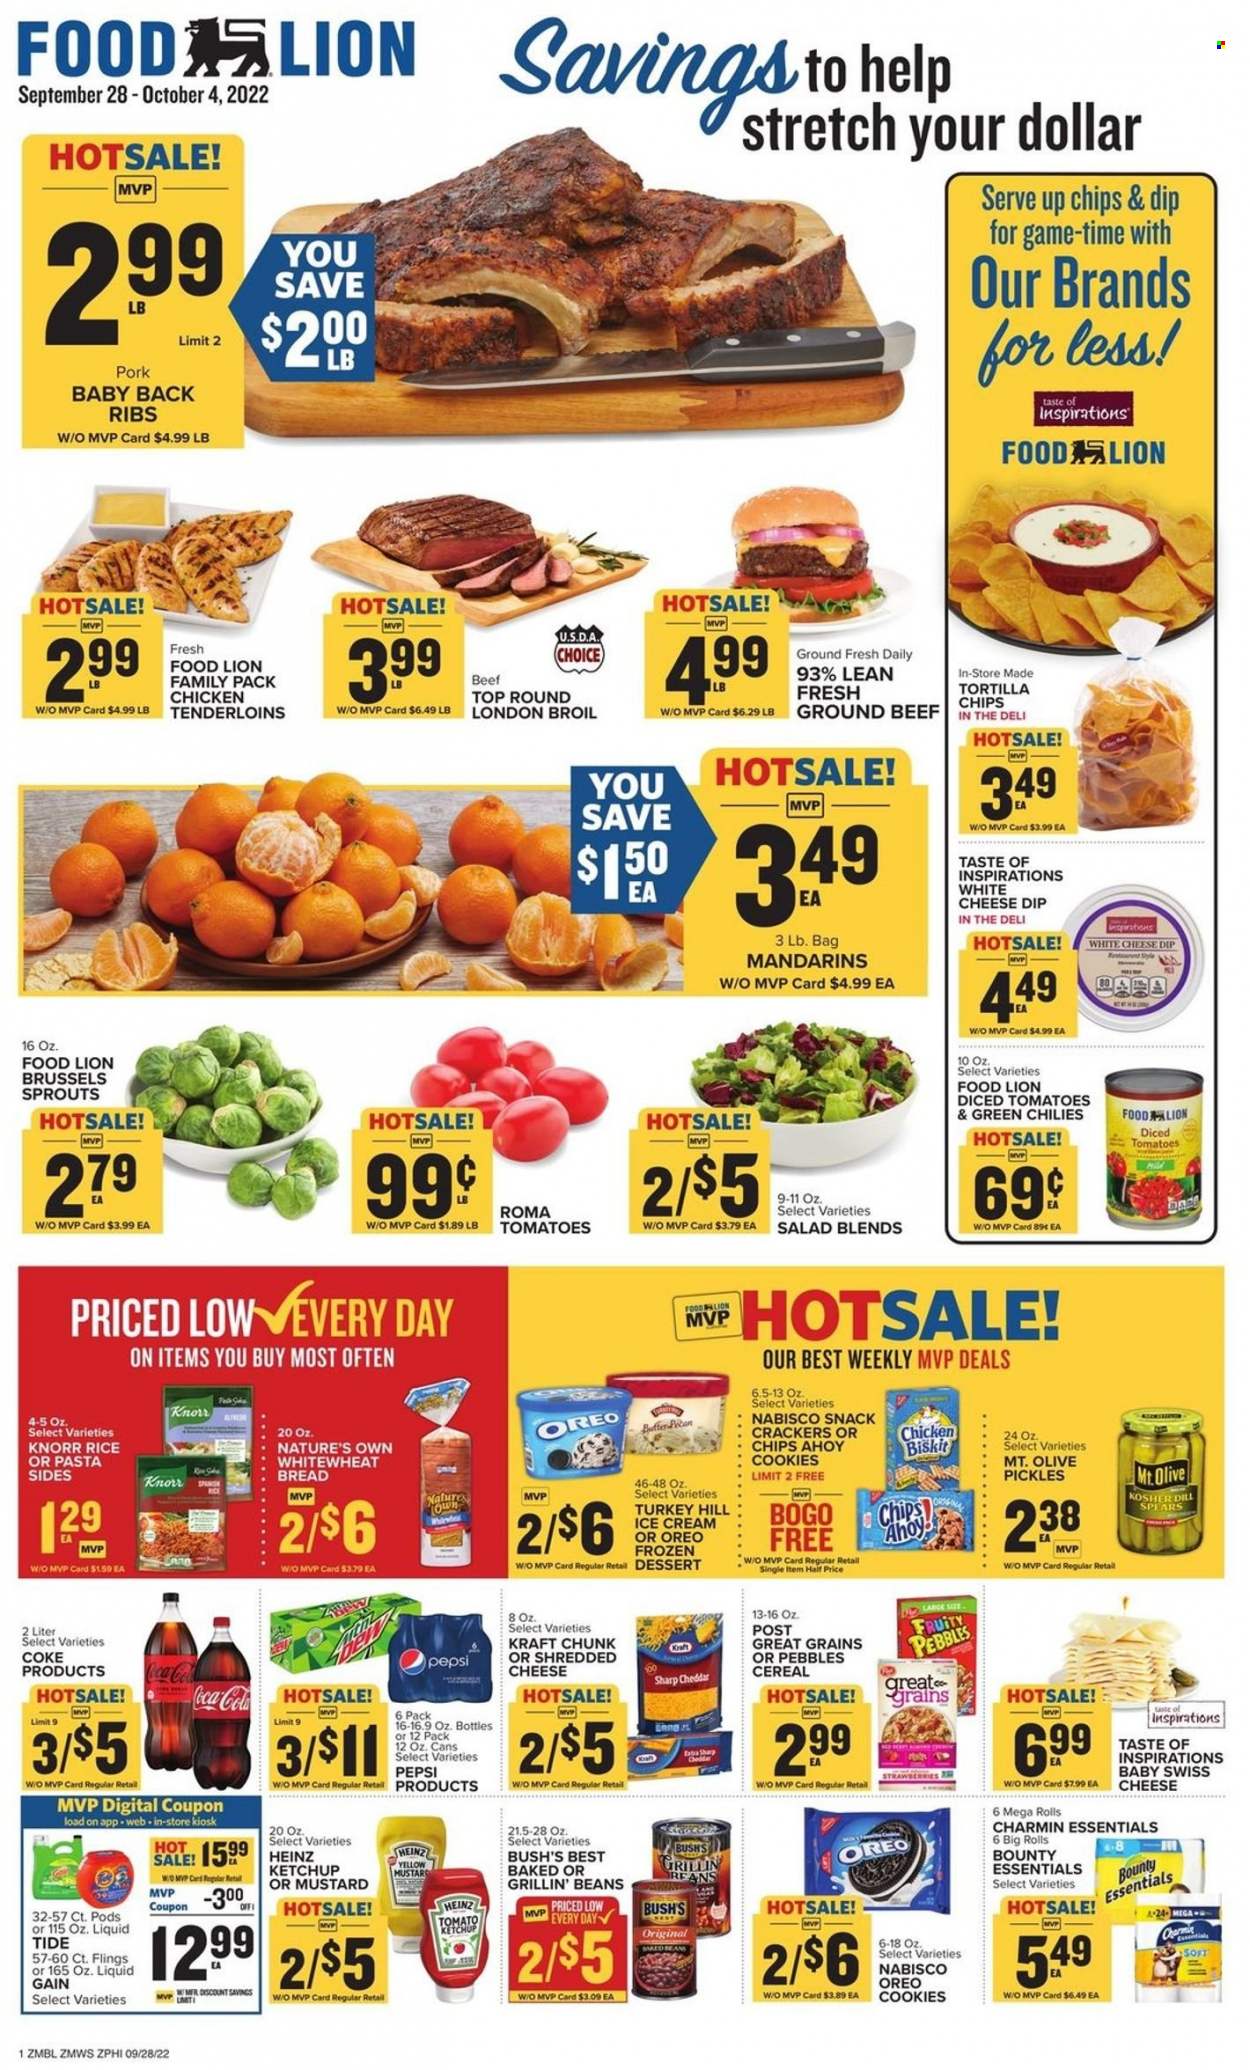 thumbnail - Food Lion Flyer - 09/28/2022 - 10/04/2022 - Sales products - bread, beans, tomatoes, salad, brussel sprouts, mandarines, strawberries, Knorr, pasta sides, Kraft®, shredded cheese, swiss cheese, Oreo, butter, ice cream, cookies, snack, Bounty, crackers, tortilla chips, Heinz, pickles, tomatoes & green chilies, diced tomatoes, cereals, Fruity Pebbles, dill, mustard, ketchup, Coca-Cola, Pepsi, beef meat, ground beef, pork meat, pork ribs, pork back ribs, Charmin, Gain, Tide, Nature's Own. Page 1.